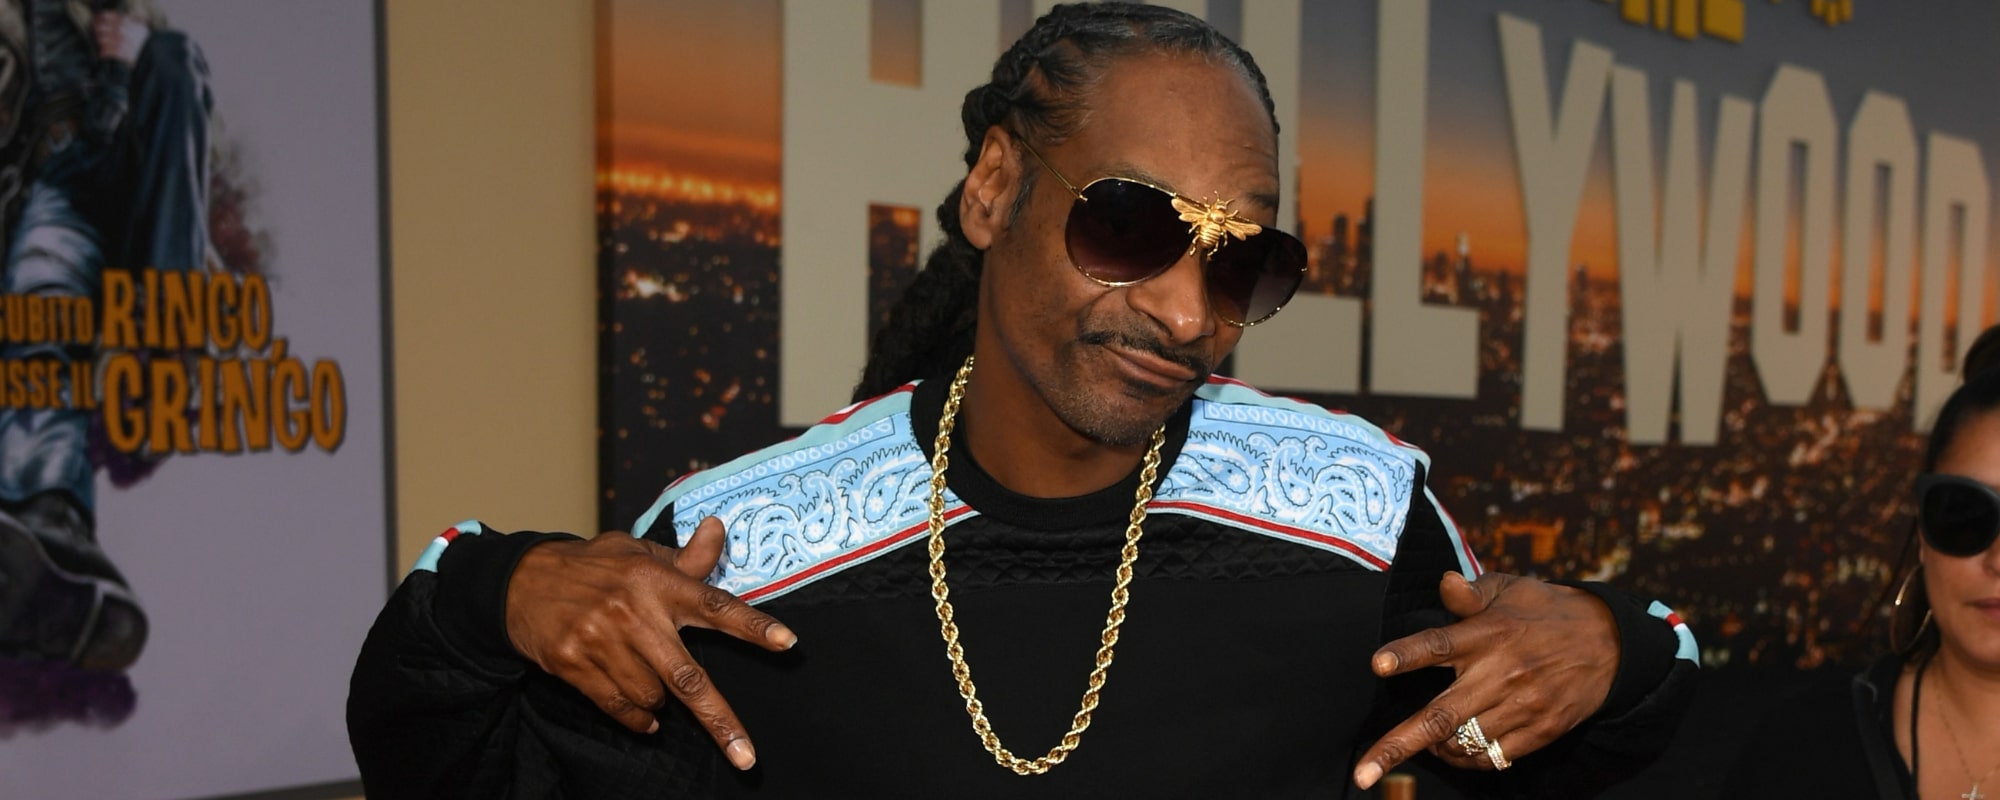 Snoop Dogg with be a coach on The Voice next season